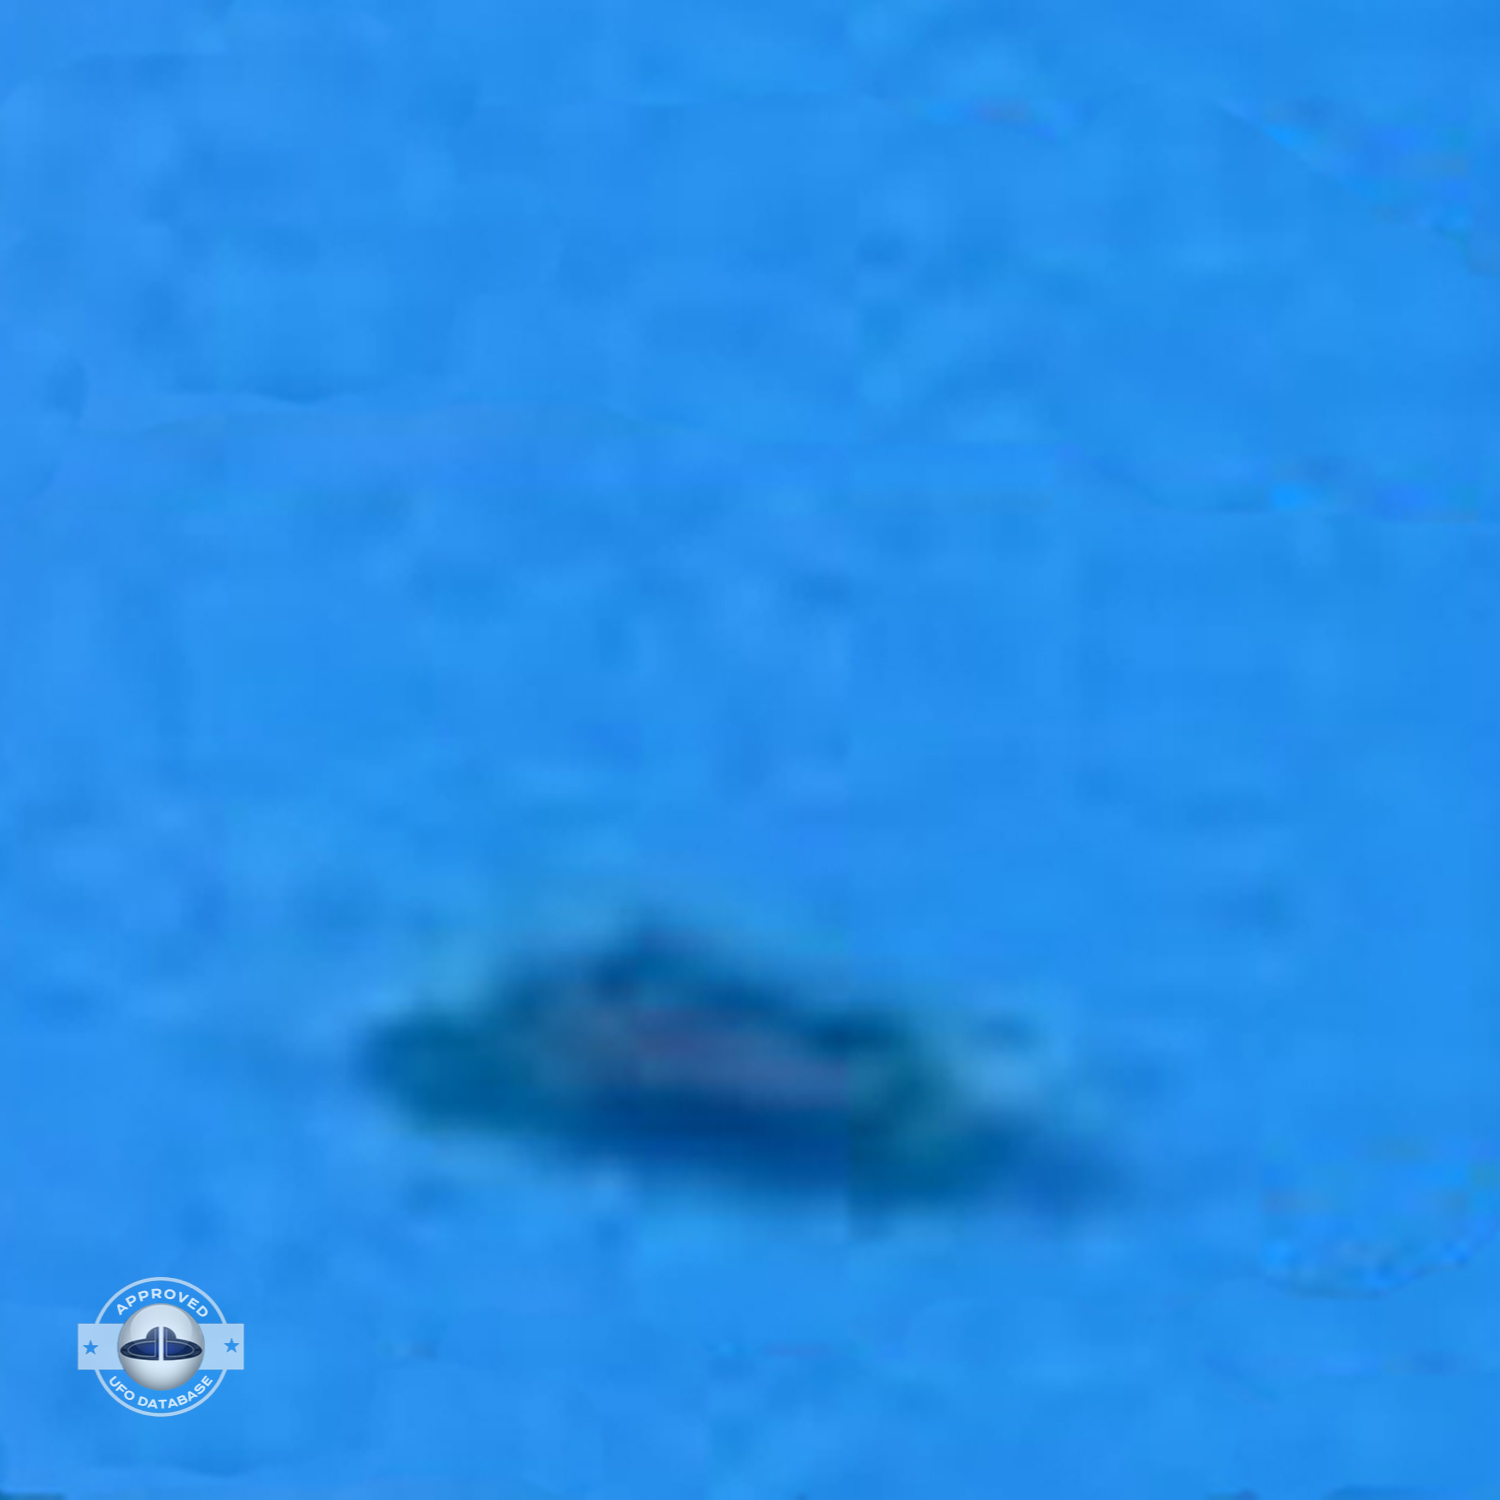 Picture of UFO near airplane over Vnukovo Airport | Moscow, Russia UFO Picture #179-5